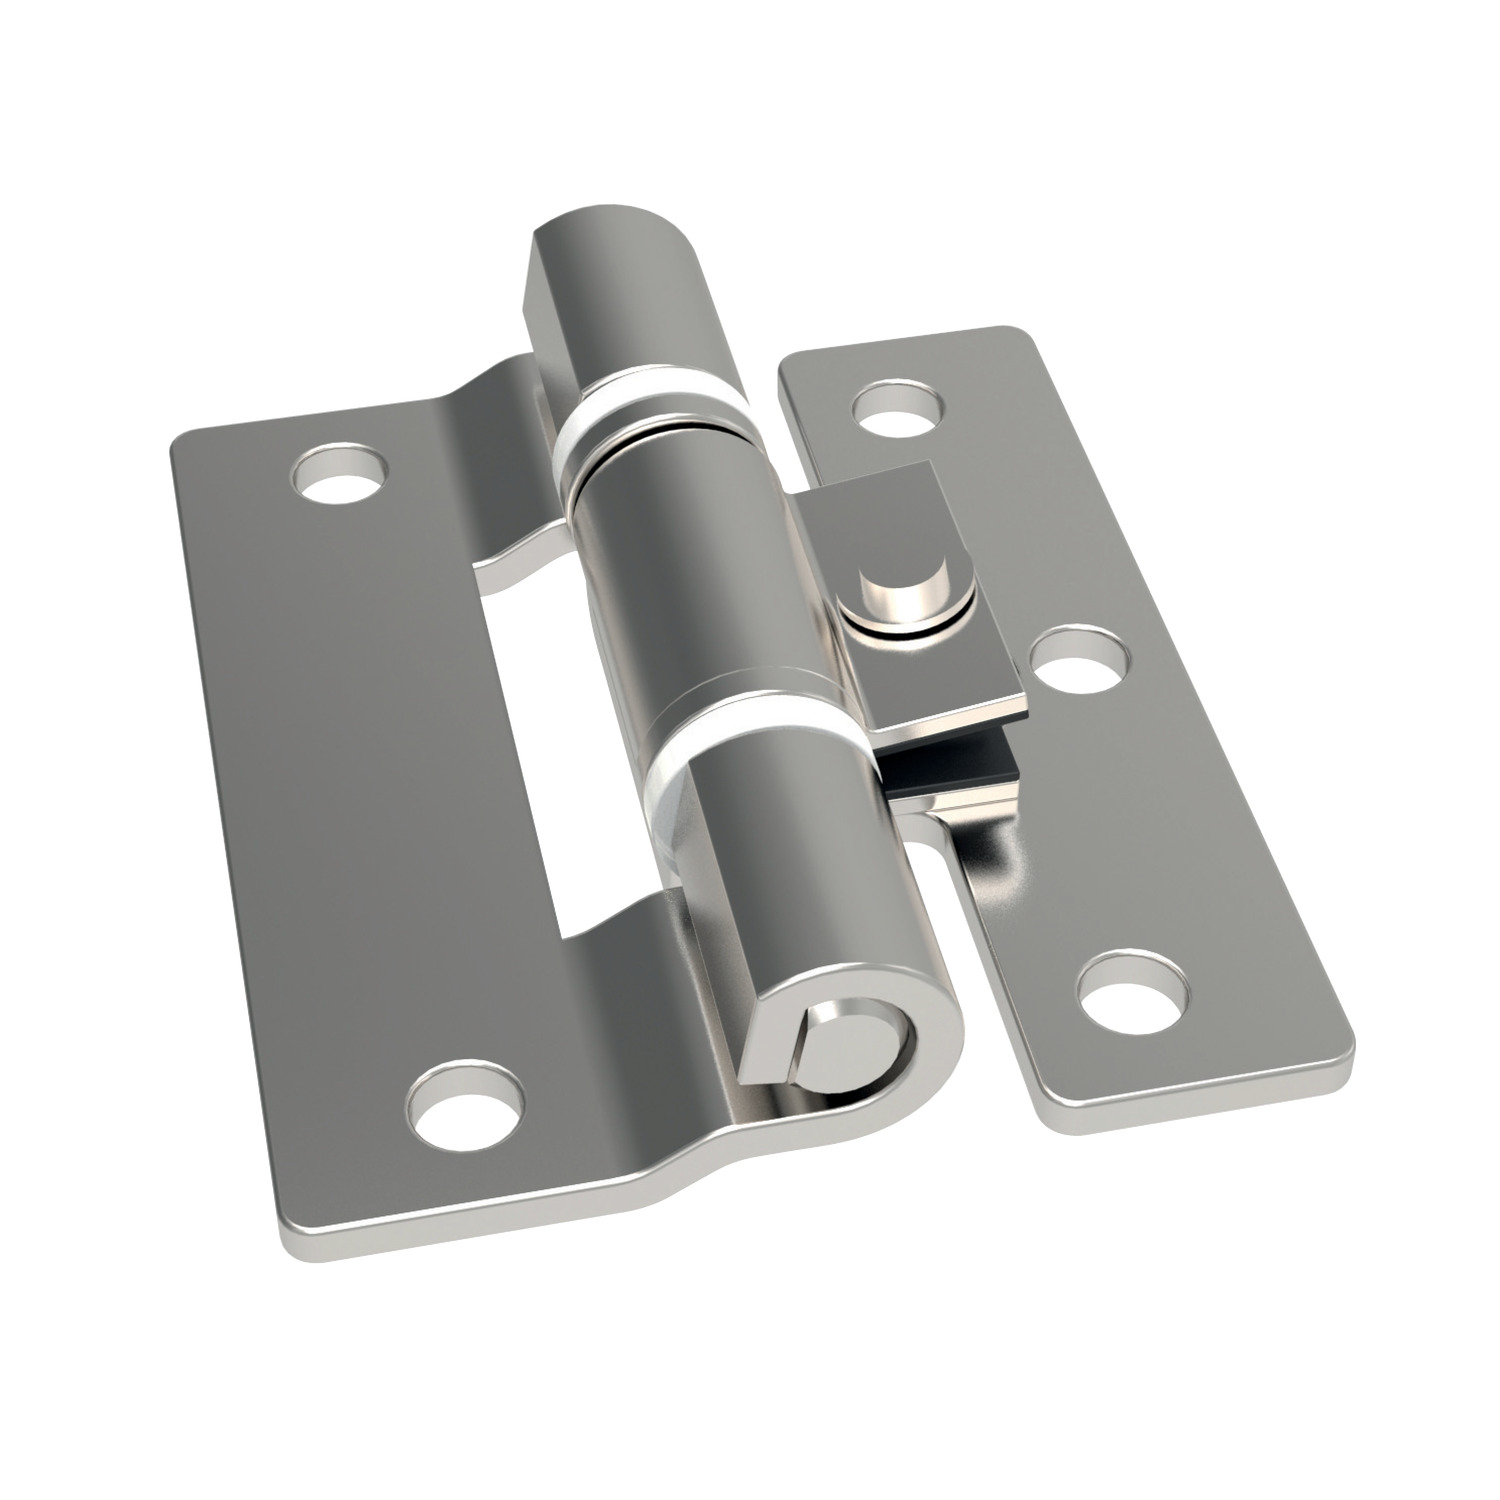 Torque and Positioning Hinges